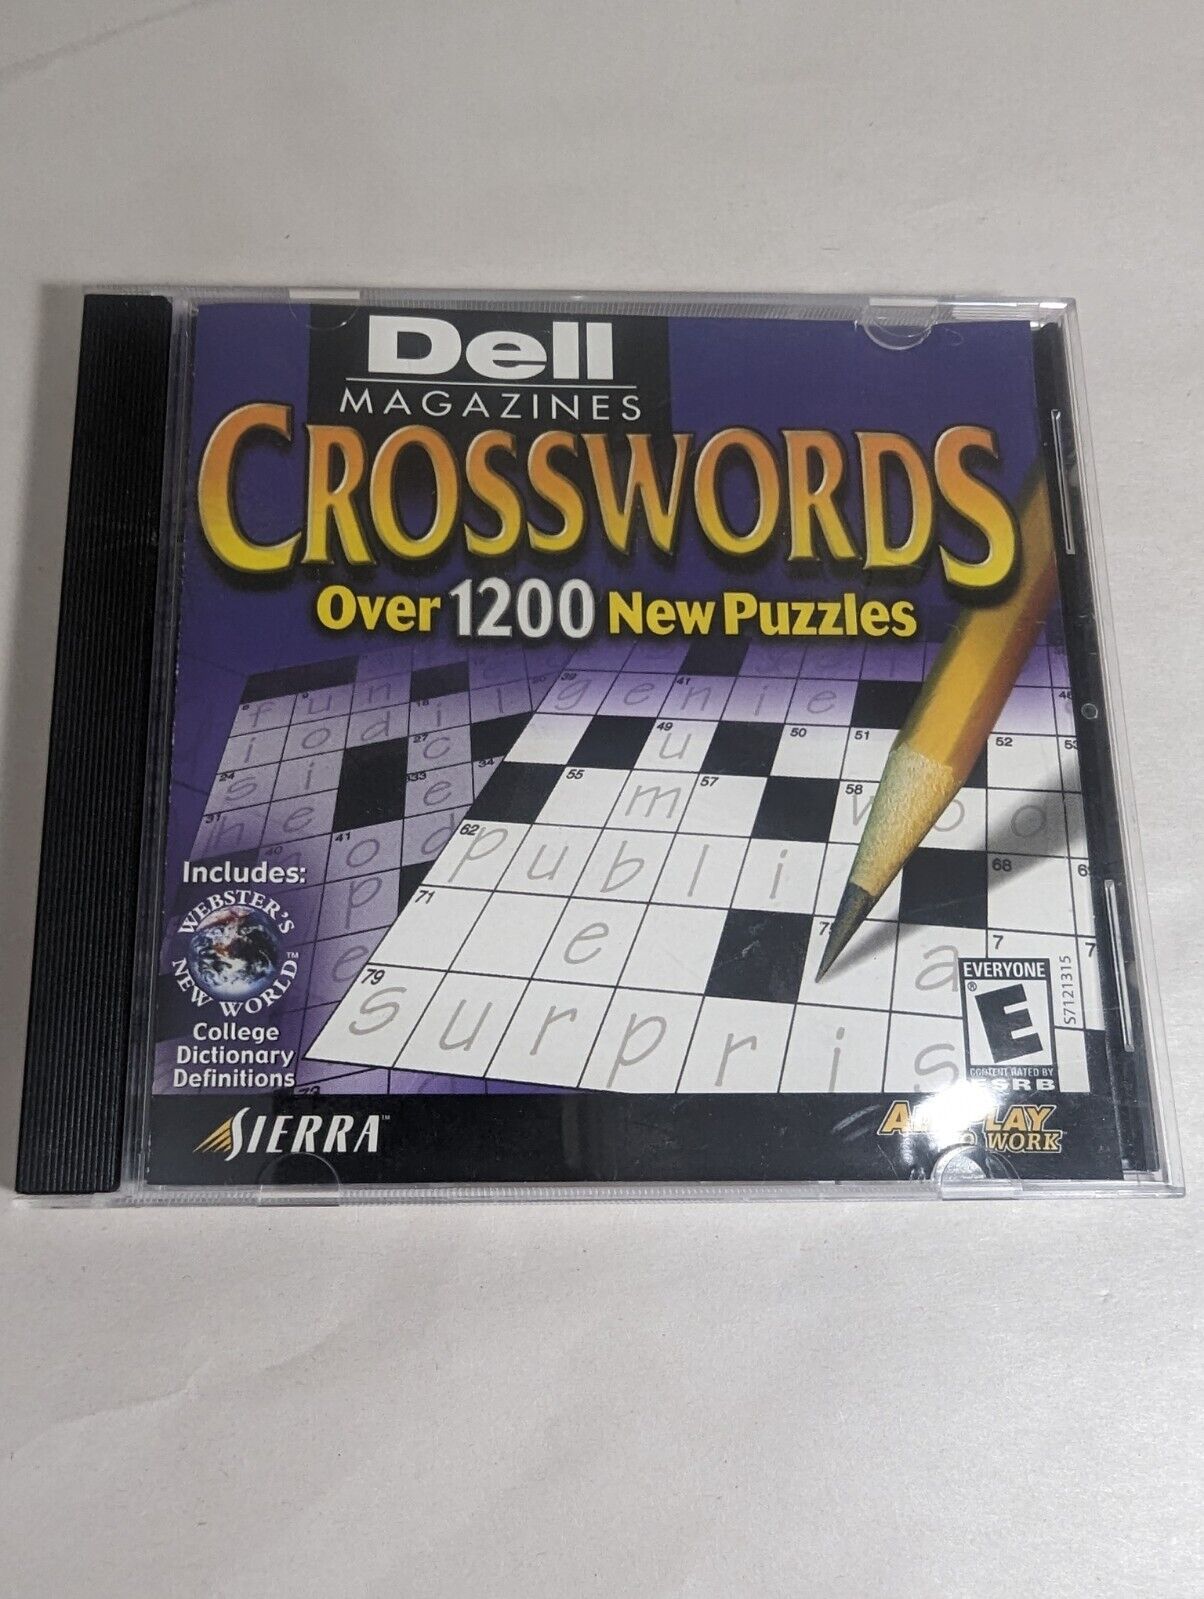 Sierra Dell Magazine Crosswords Over 1200 New Puzzles CD-ROM Websters New World